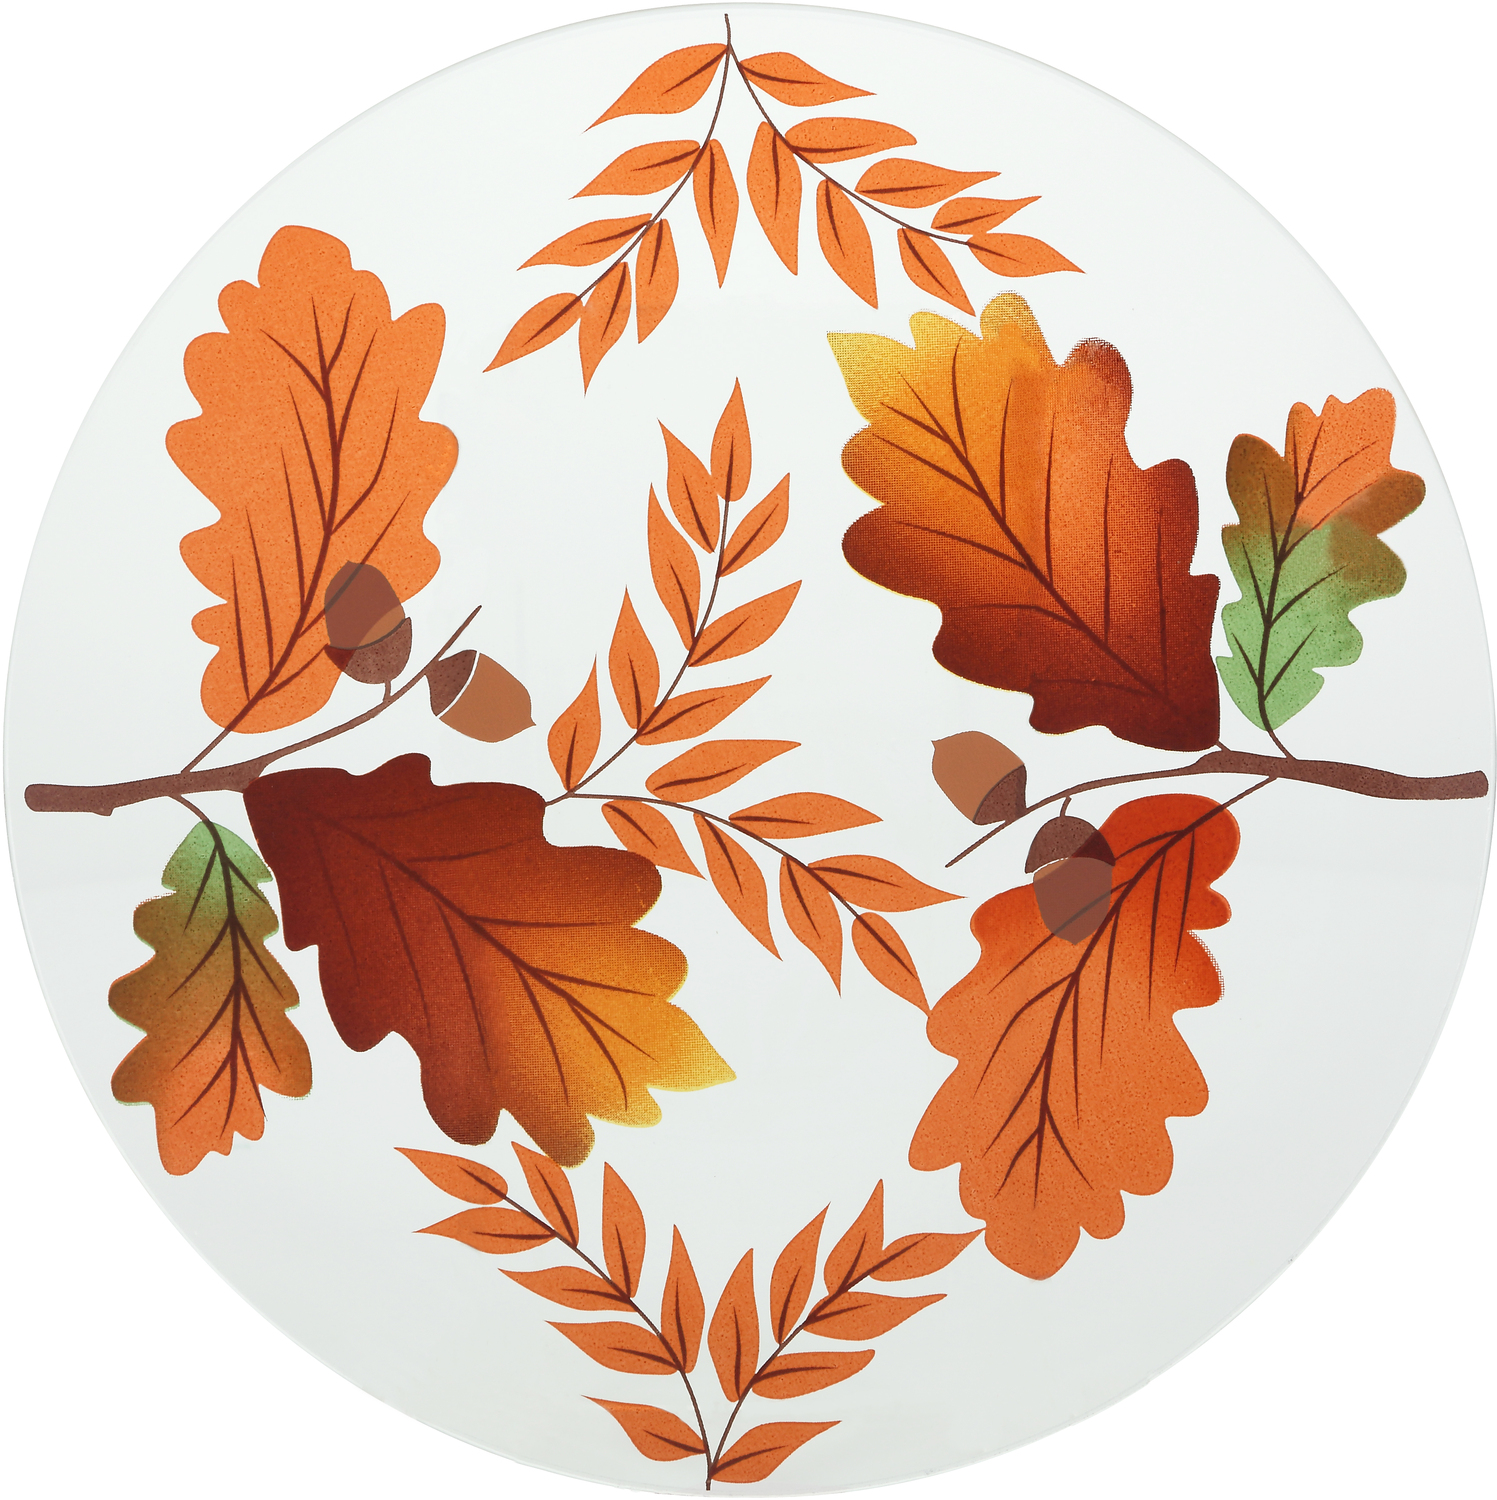 Harvest Leaves by Candle Decor - Harvest Leaves - Candle Tray